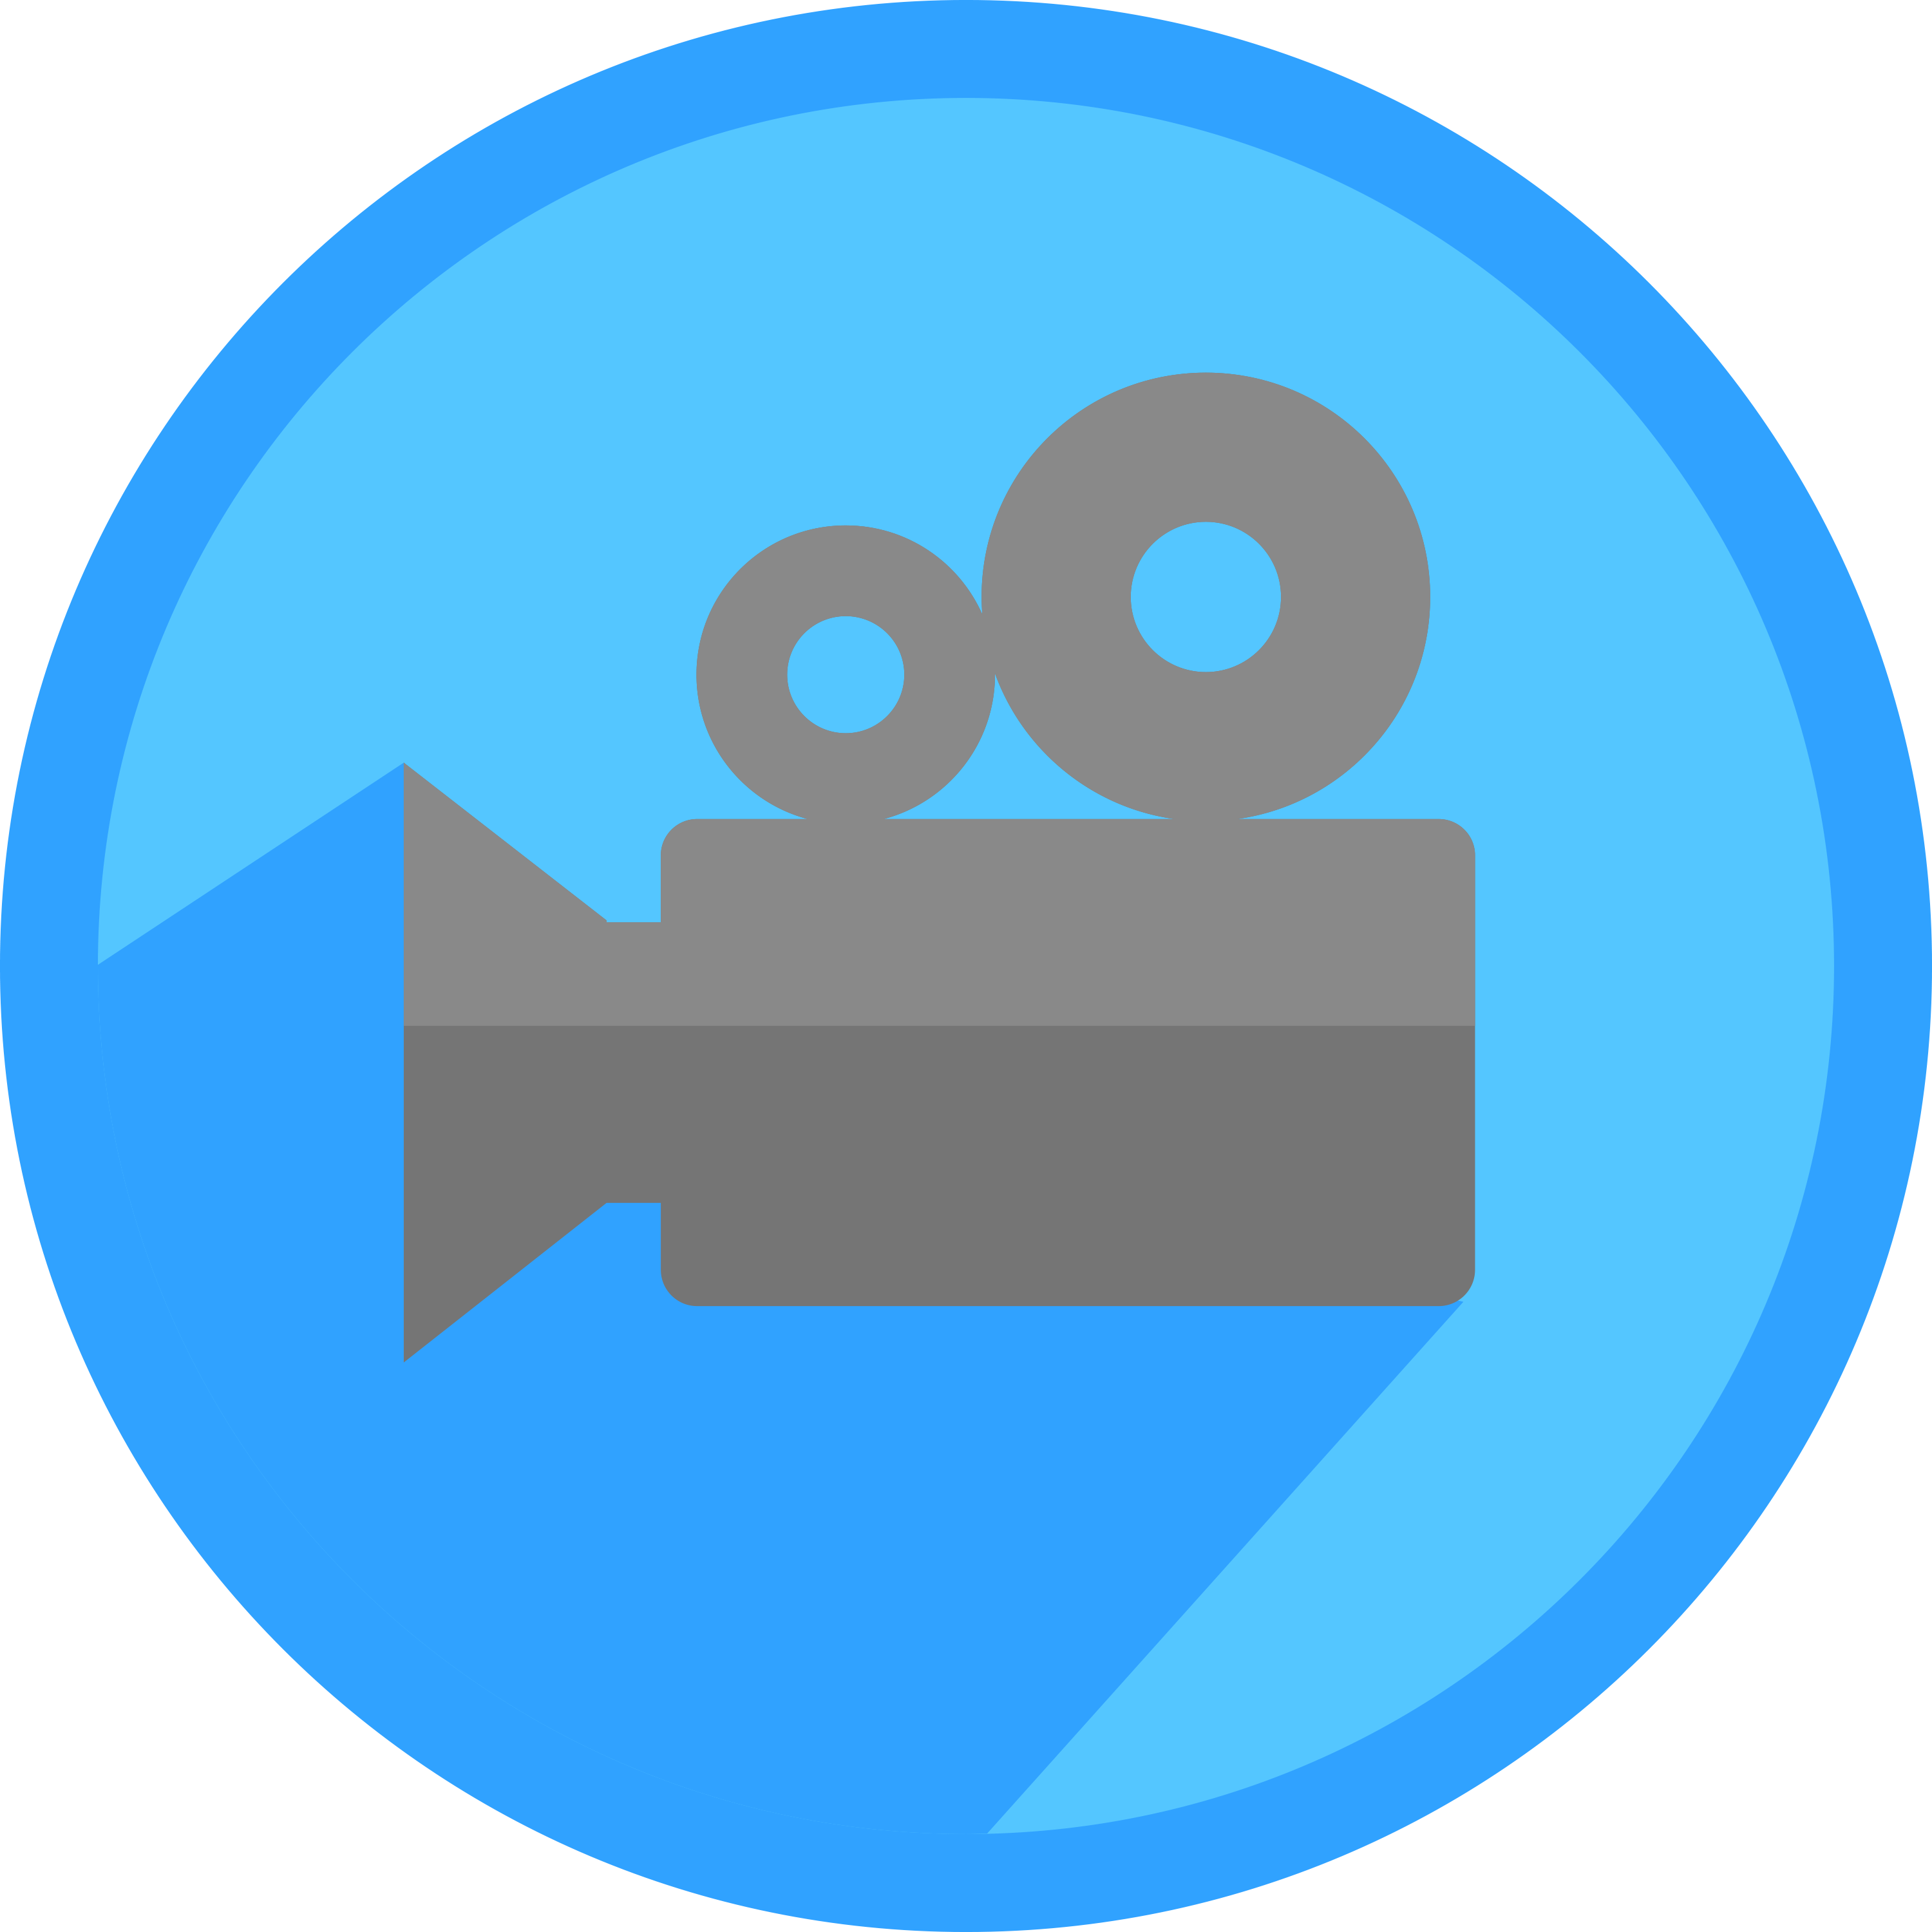 Video Recorder Png File - Video Recorder Png - HD Wallpaper 